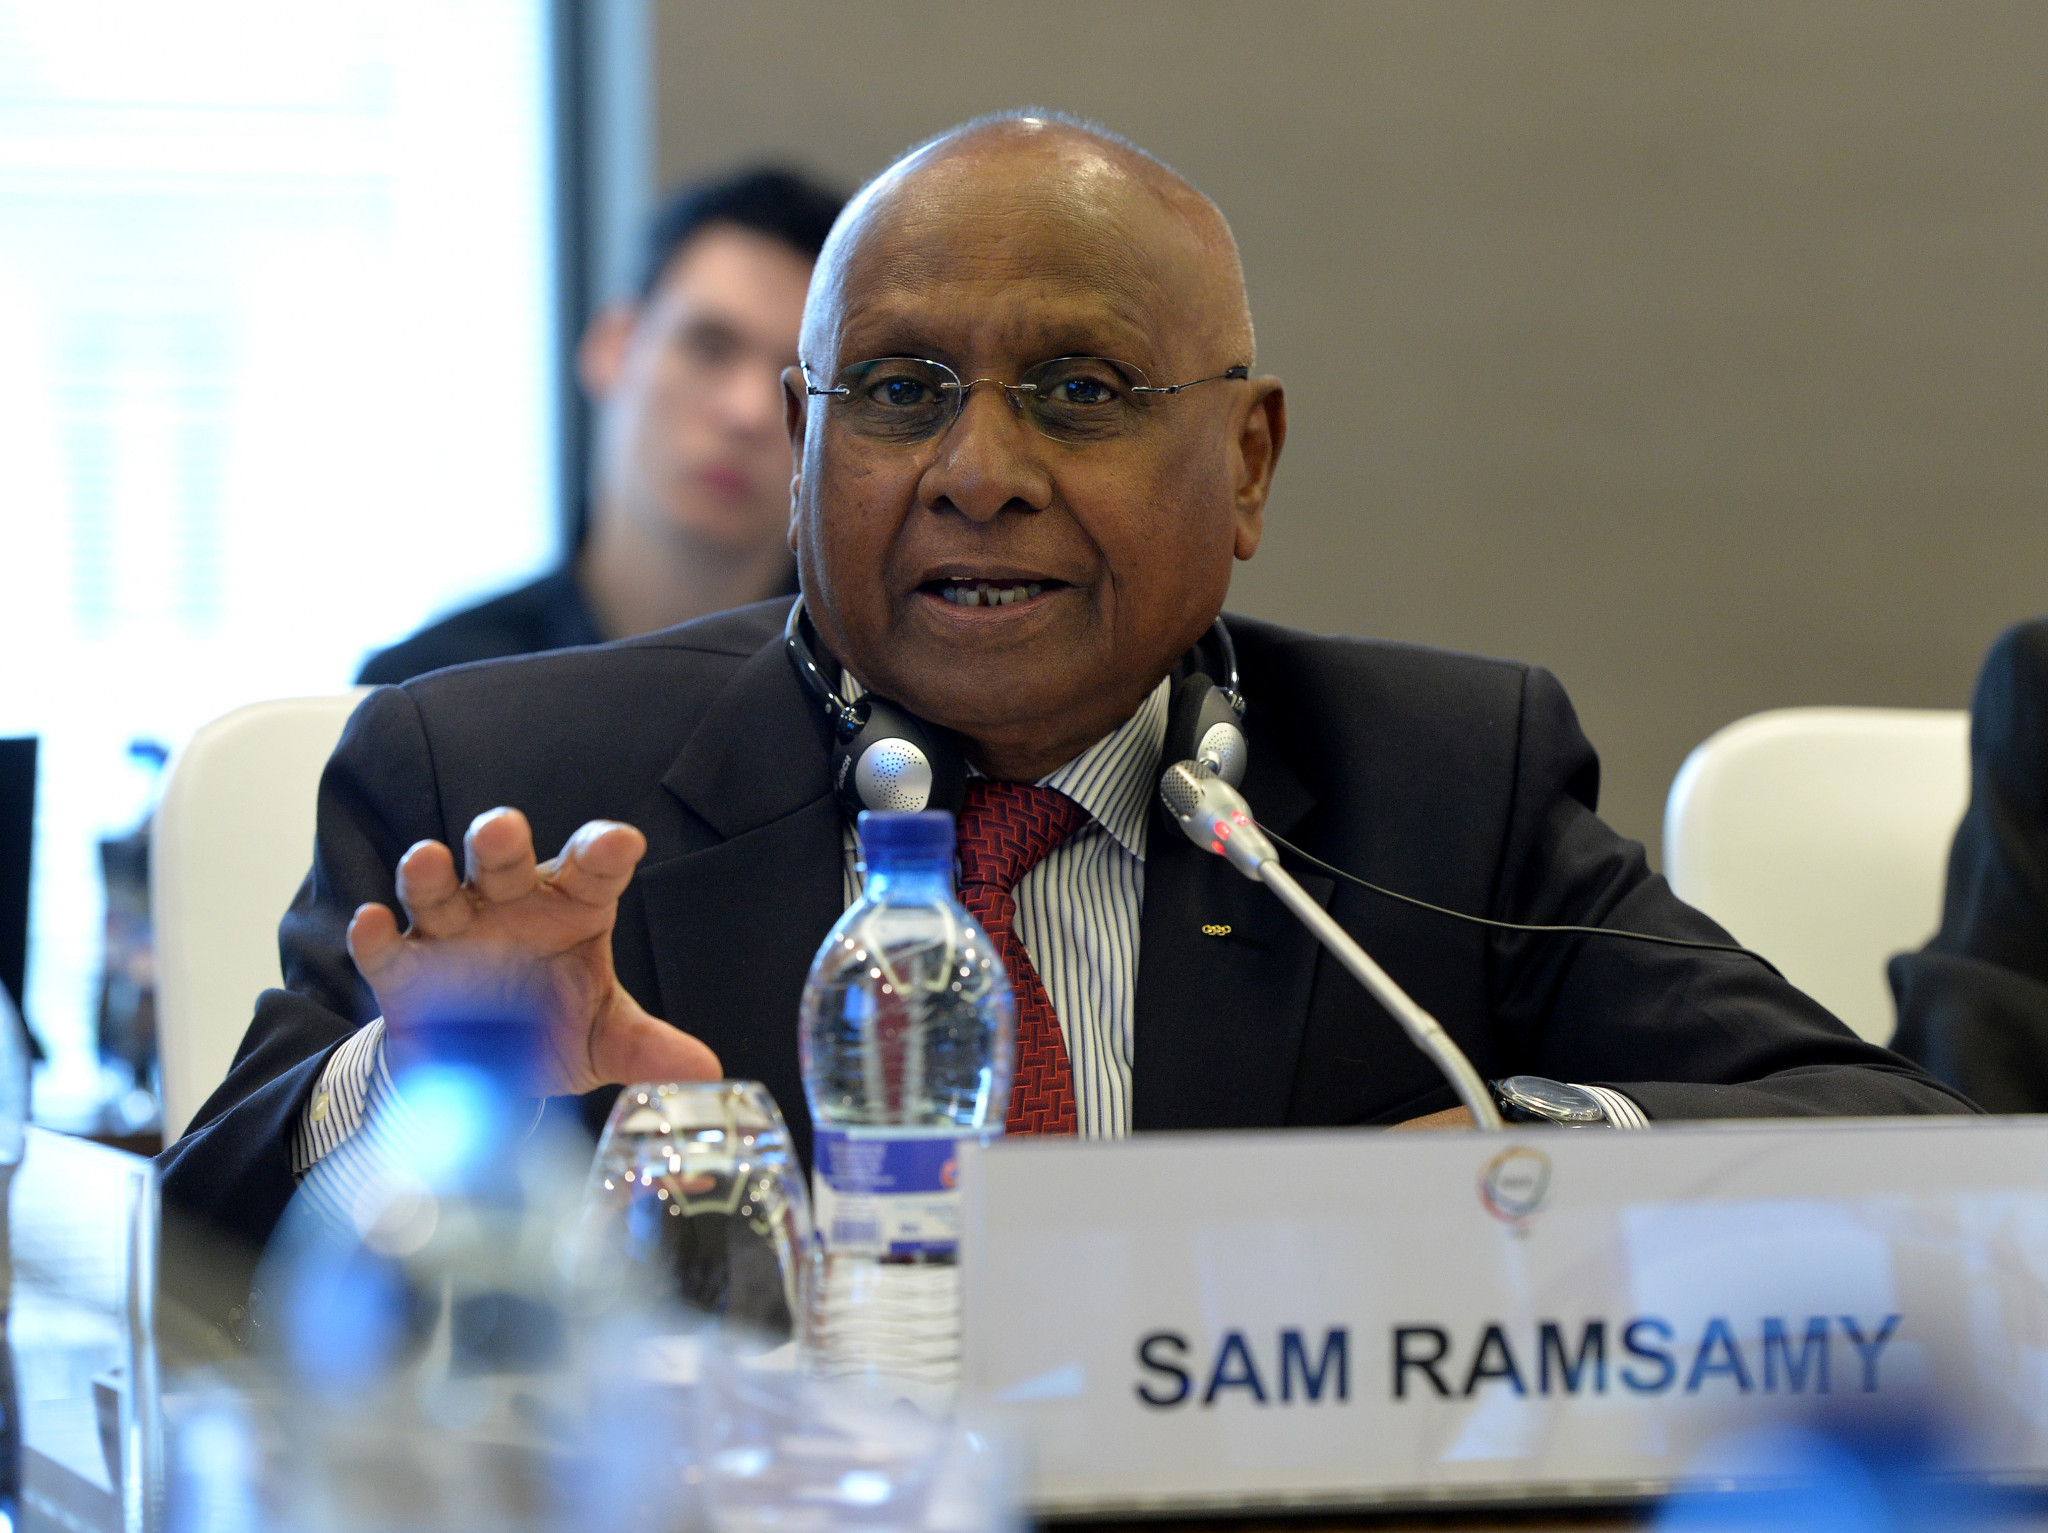 Ramsamy sent by IOC to observe National Olympic Committee of Kenya elections